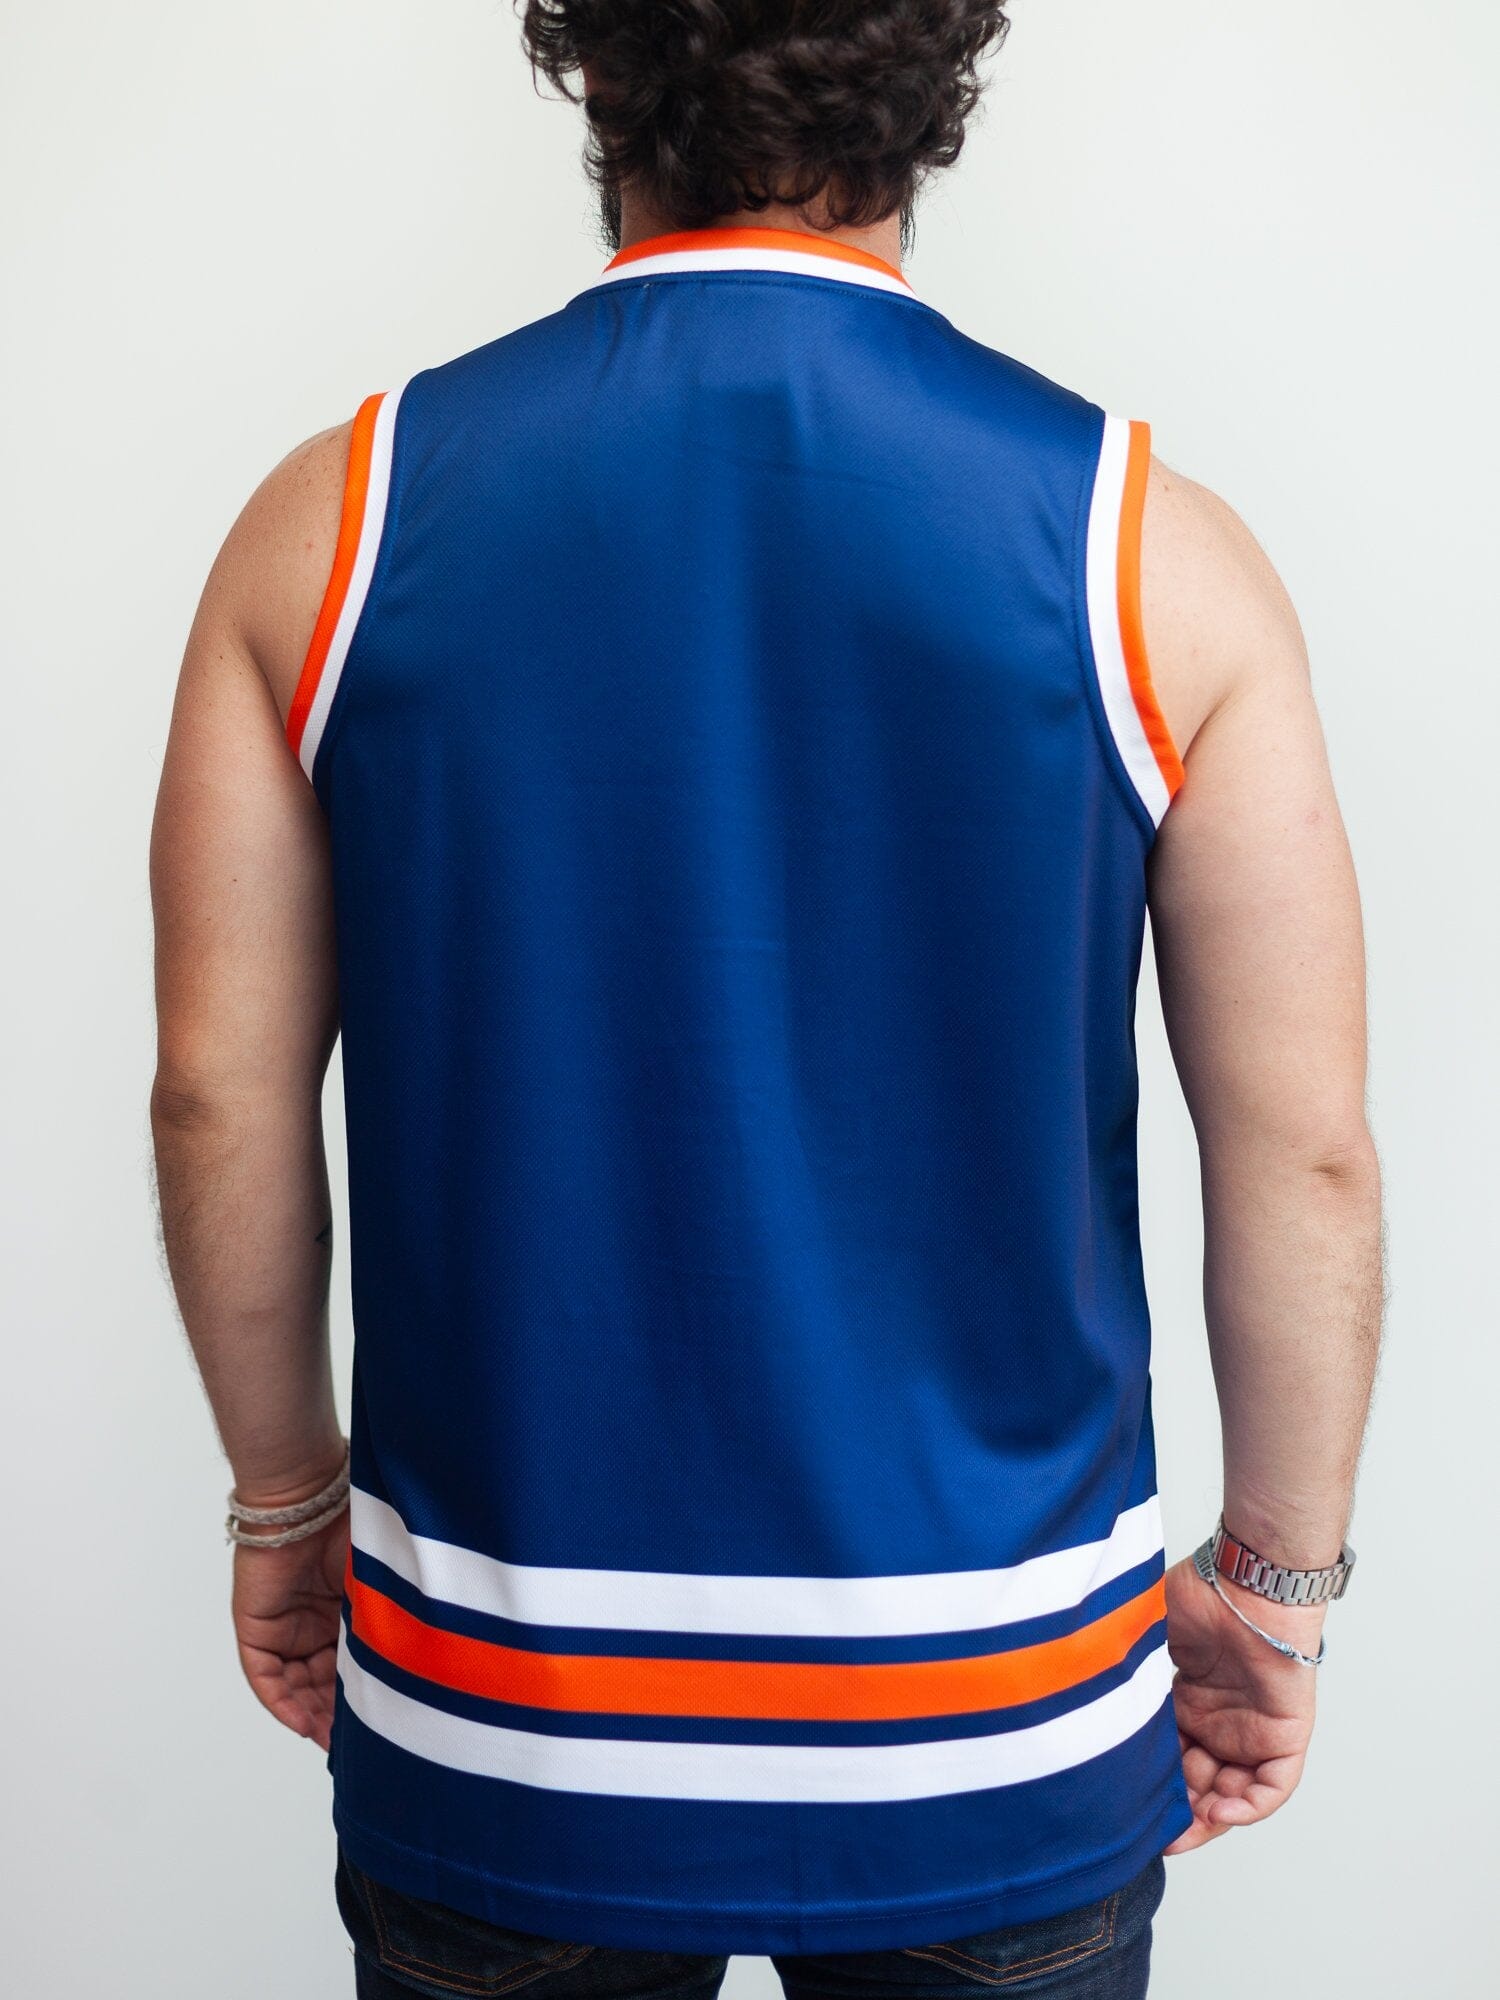 Bench Clearers Edmonton Oilers Away Hockey Tank S / White / Polyester